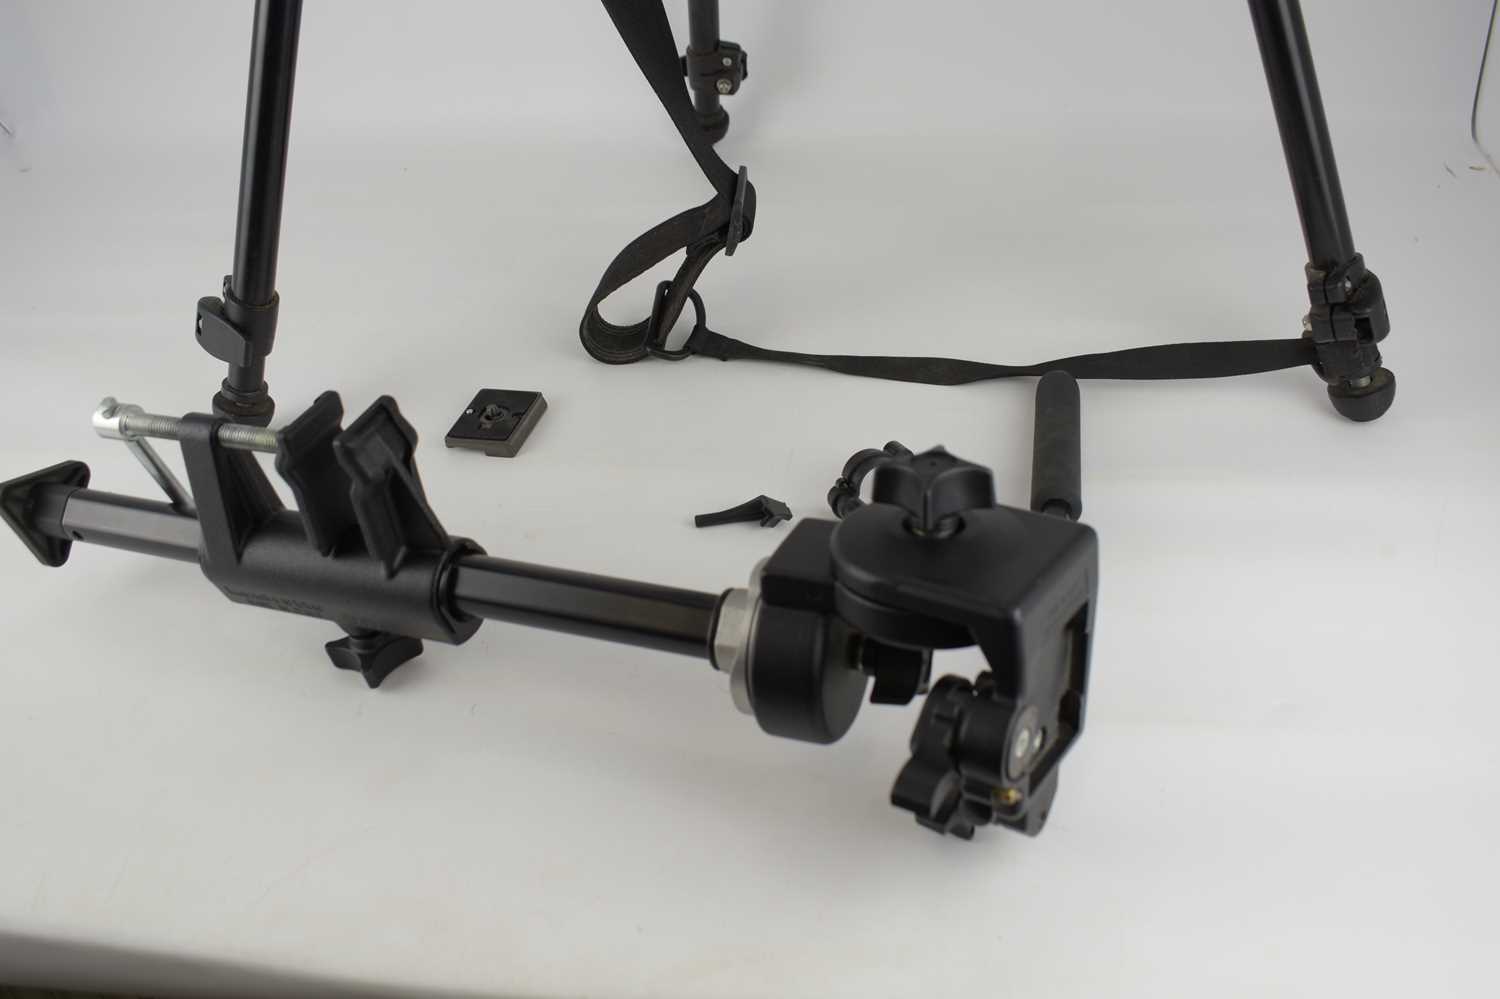 SWAROVSKI OPTIK; a professional tripod and head assembly for spotting scope and cameras, with - Image 4 of 5